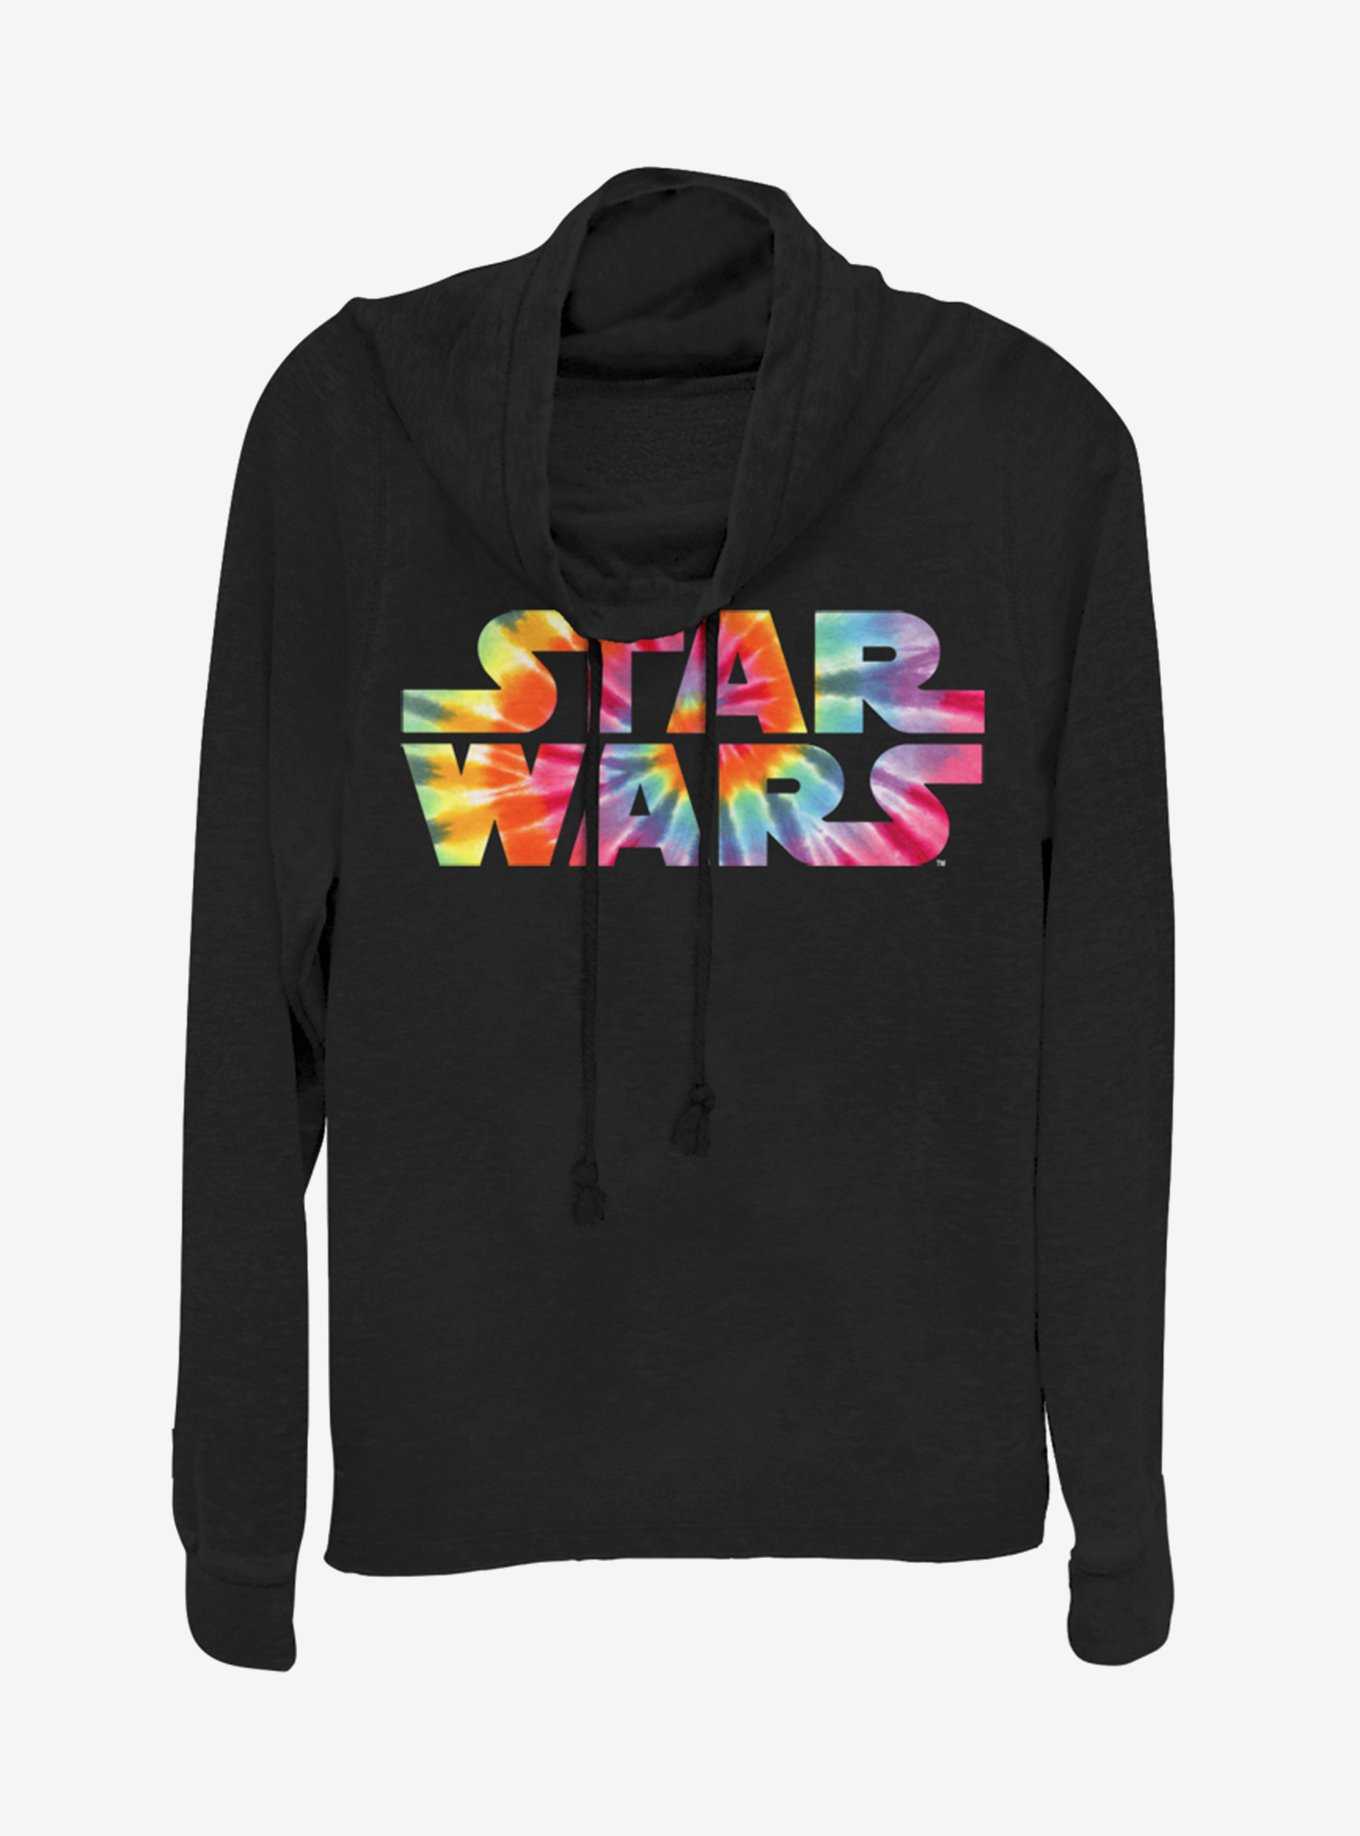 Star Wars To Dye For Cowlneck Long-Sleeve Girls Top, , hi-res